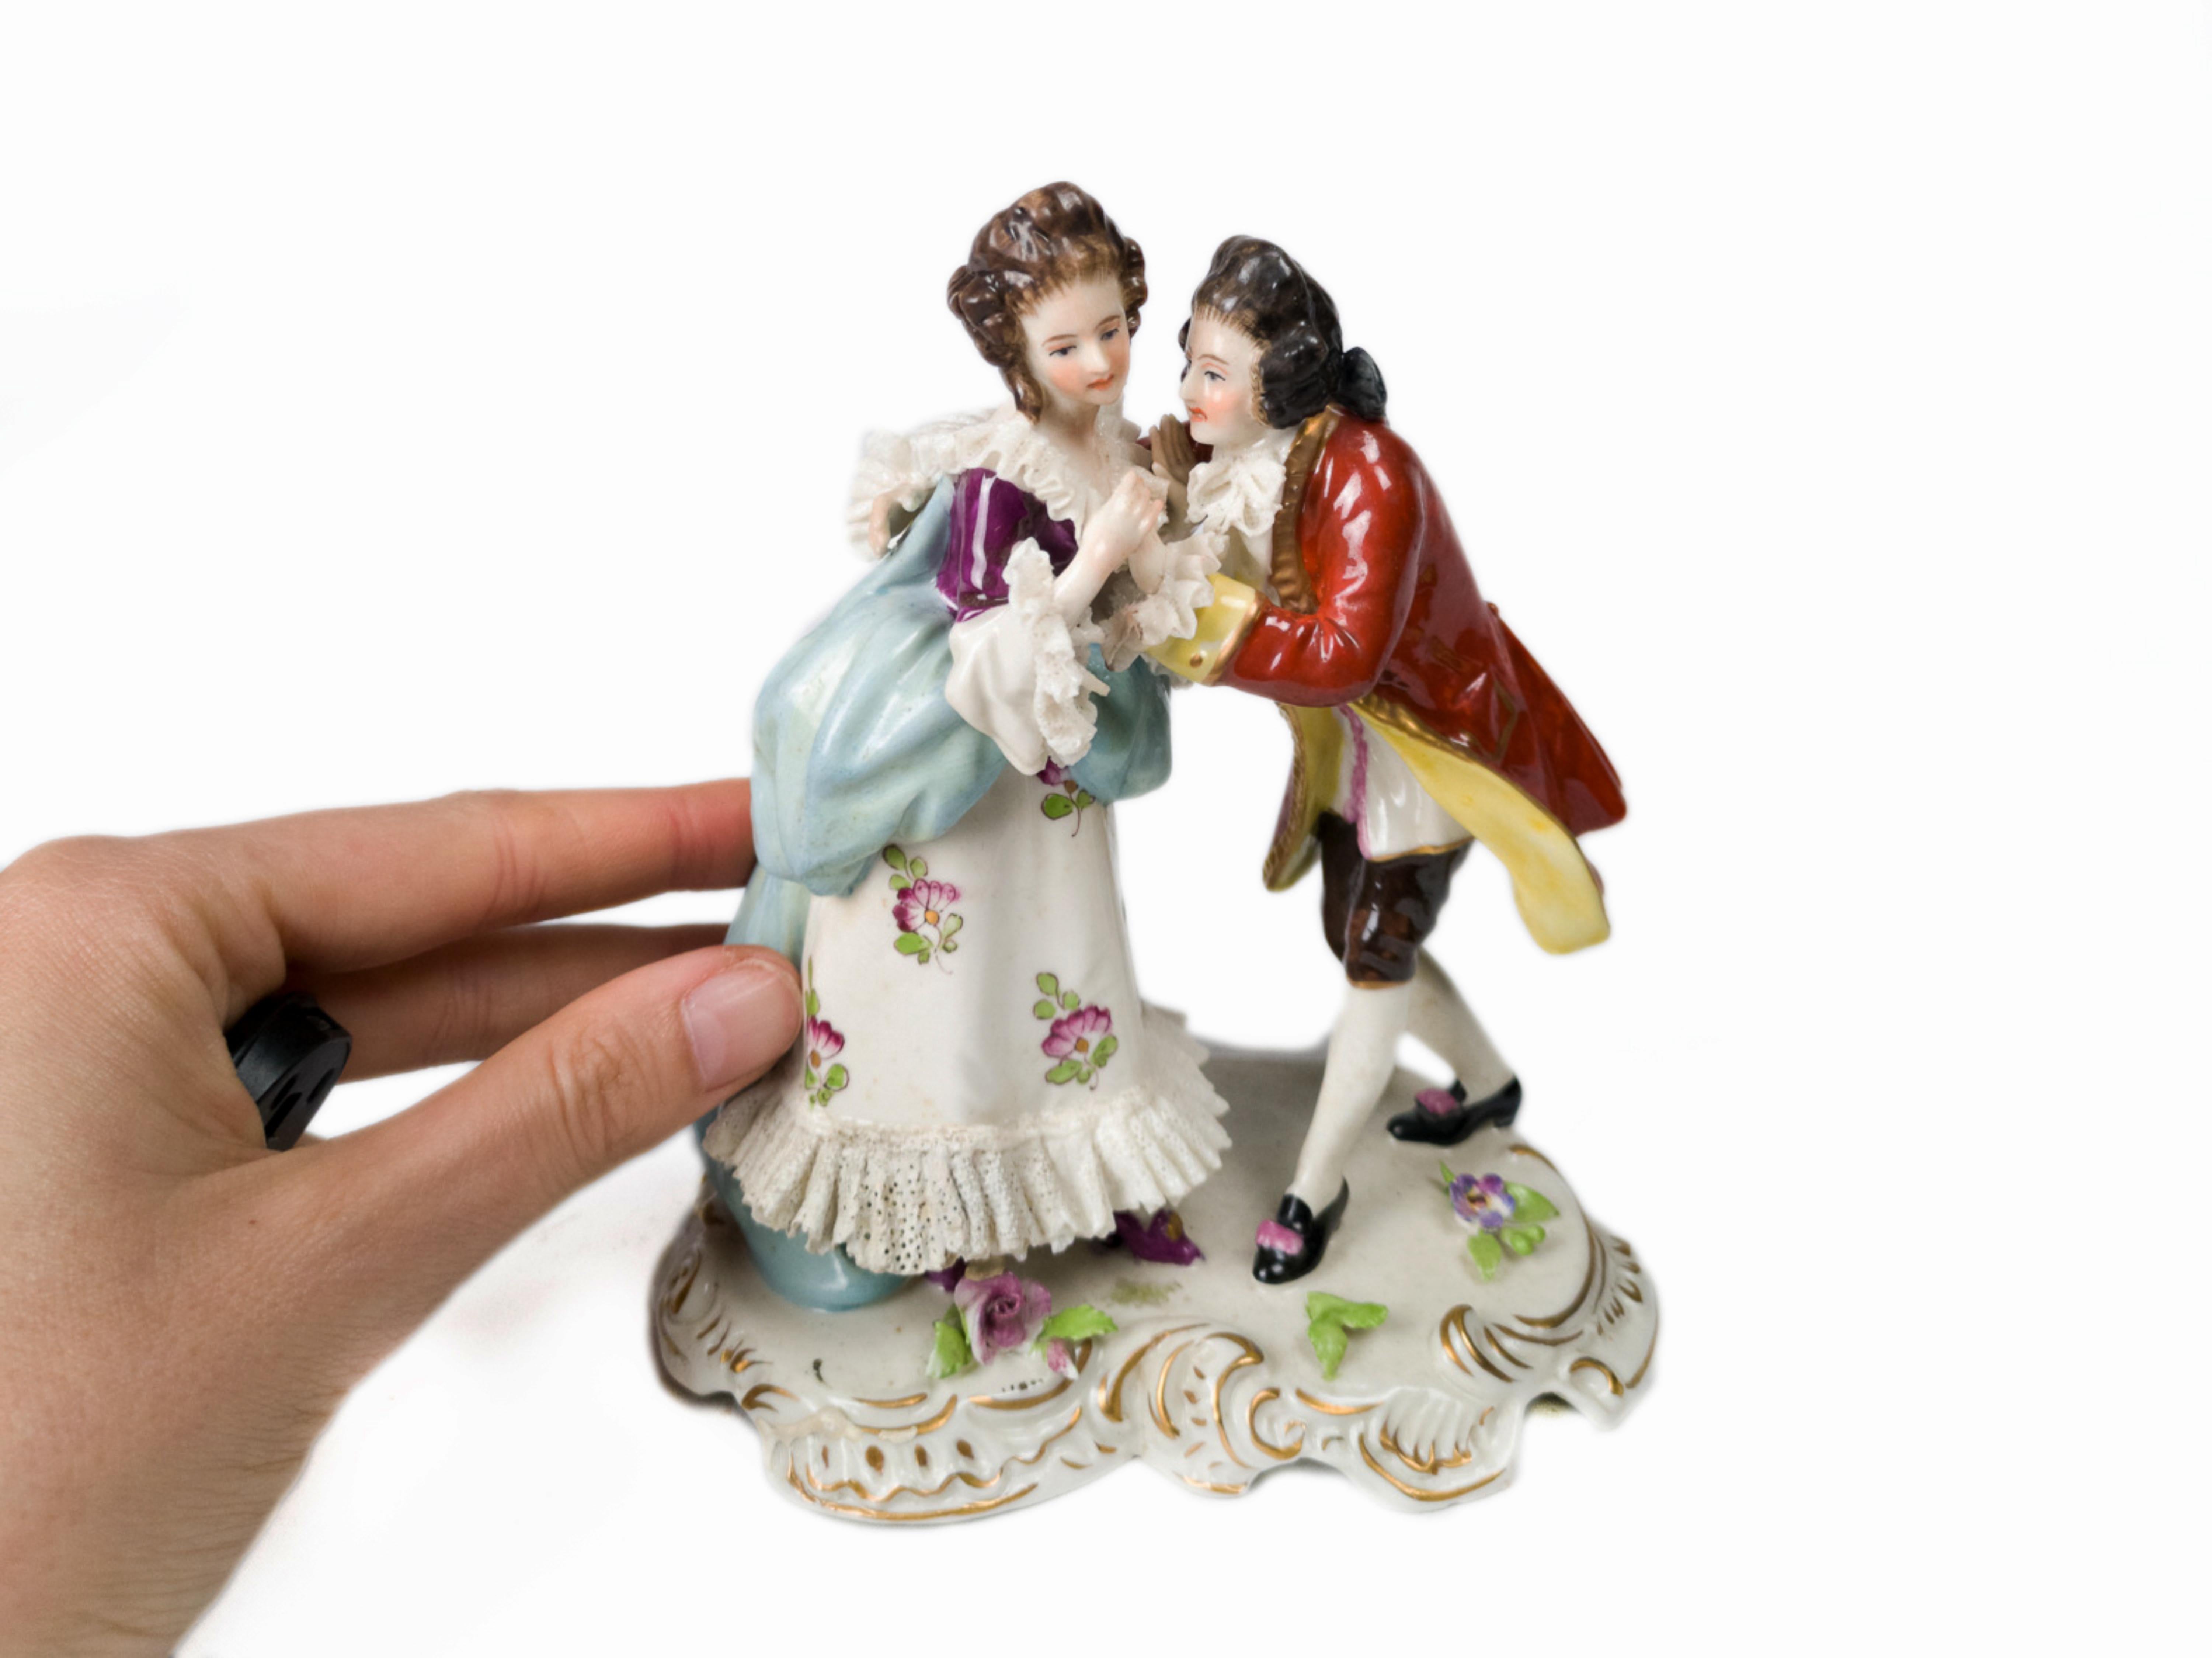 German Porcelain Figurine Of Loving Couple, Volkstedt, 19th Century  In Good Condition For Sale In Lisbon, PT